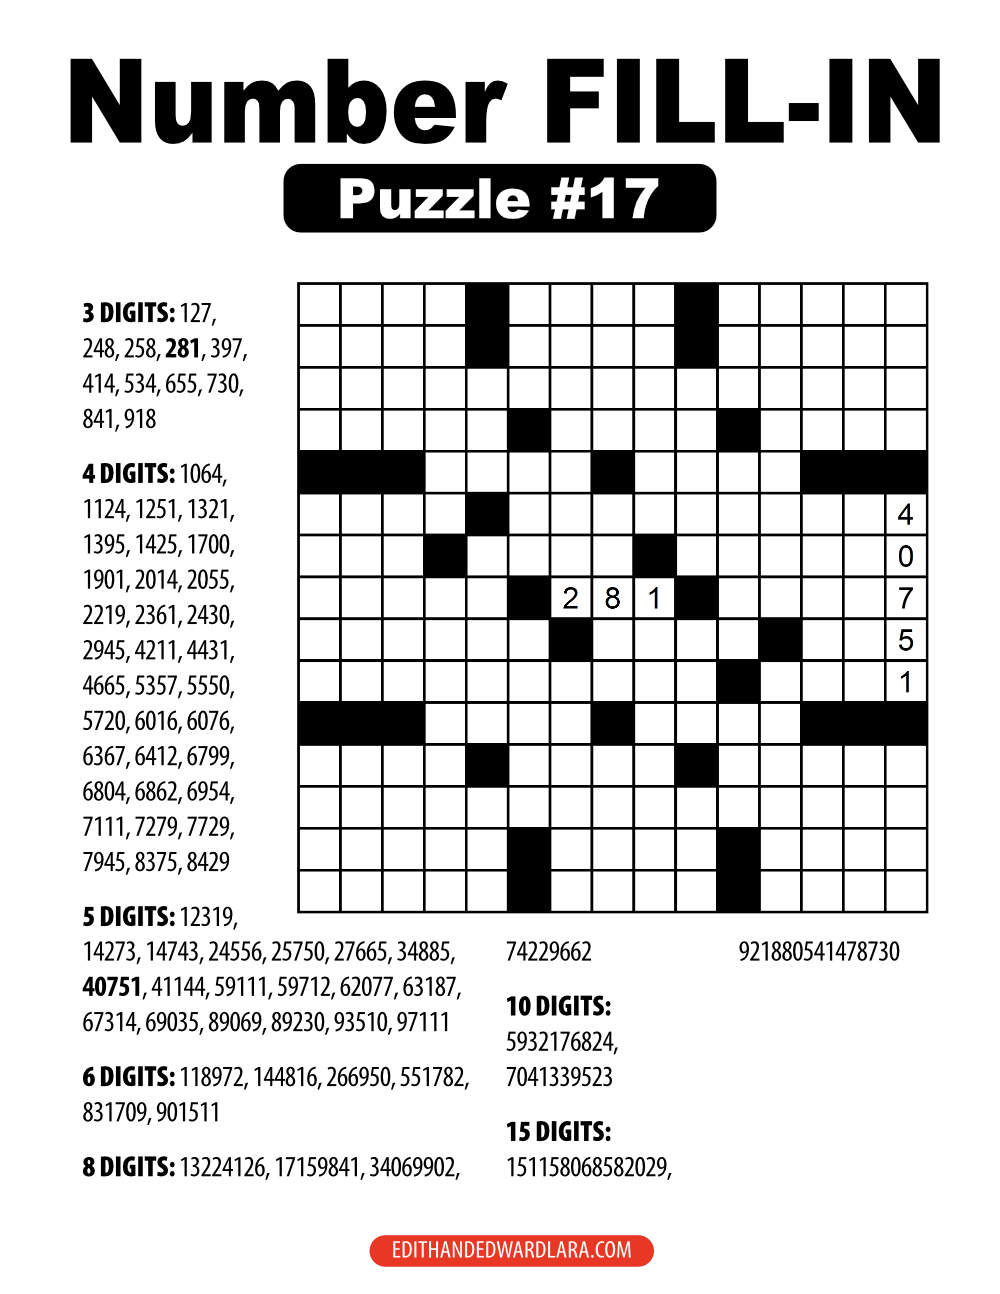 Number FILL-IN Puzzle Number 17